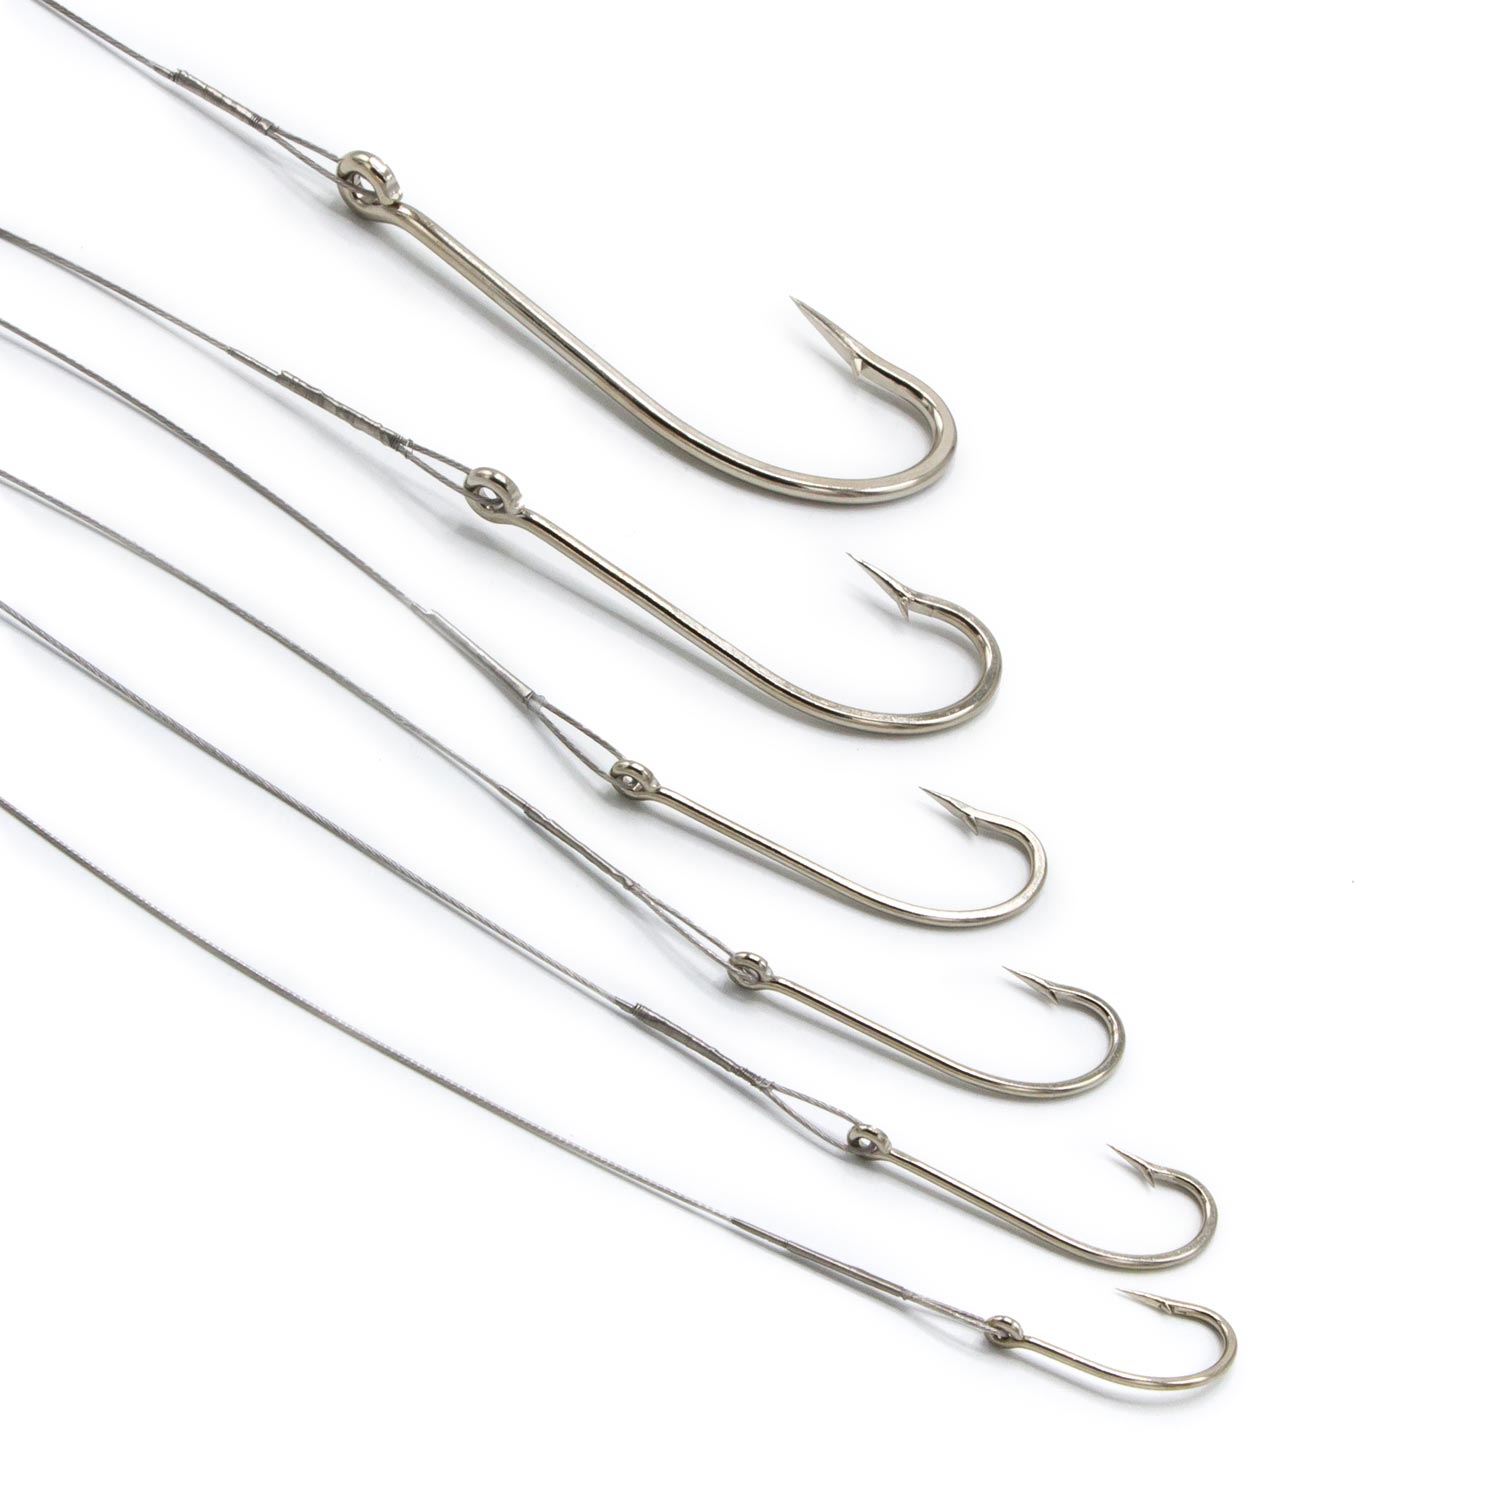  Fishing Hook with Leader,5 Hooks Fishing Rig-7